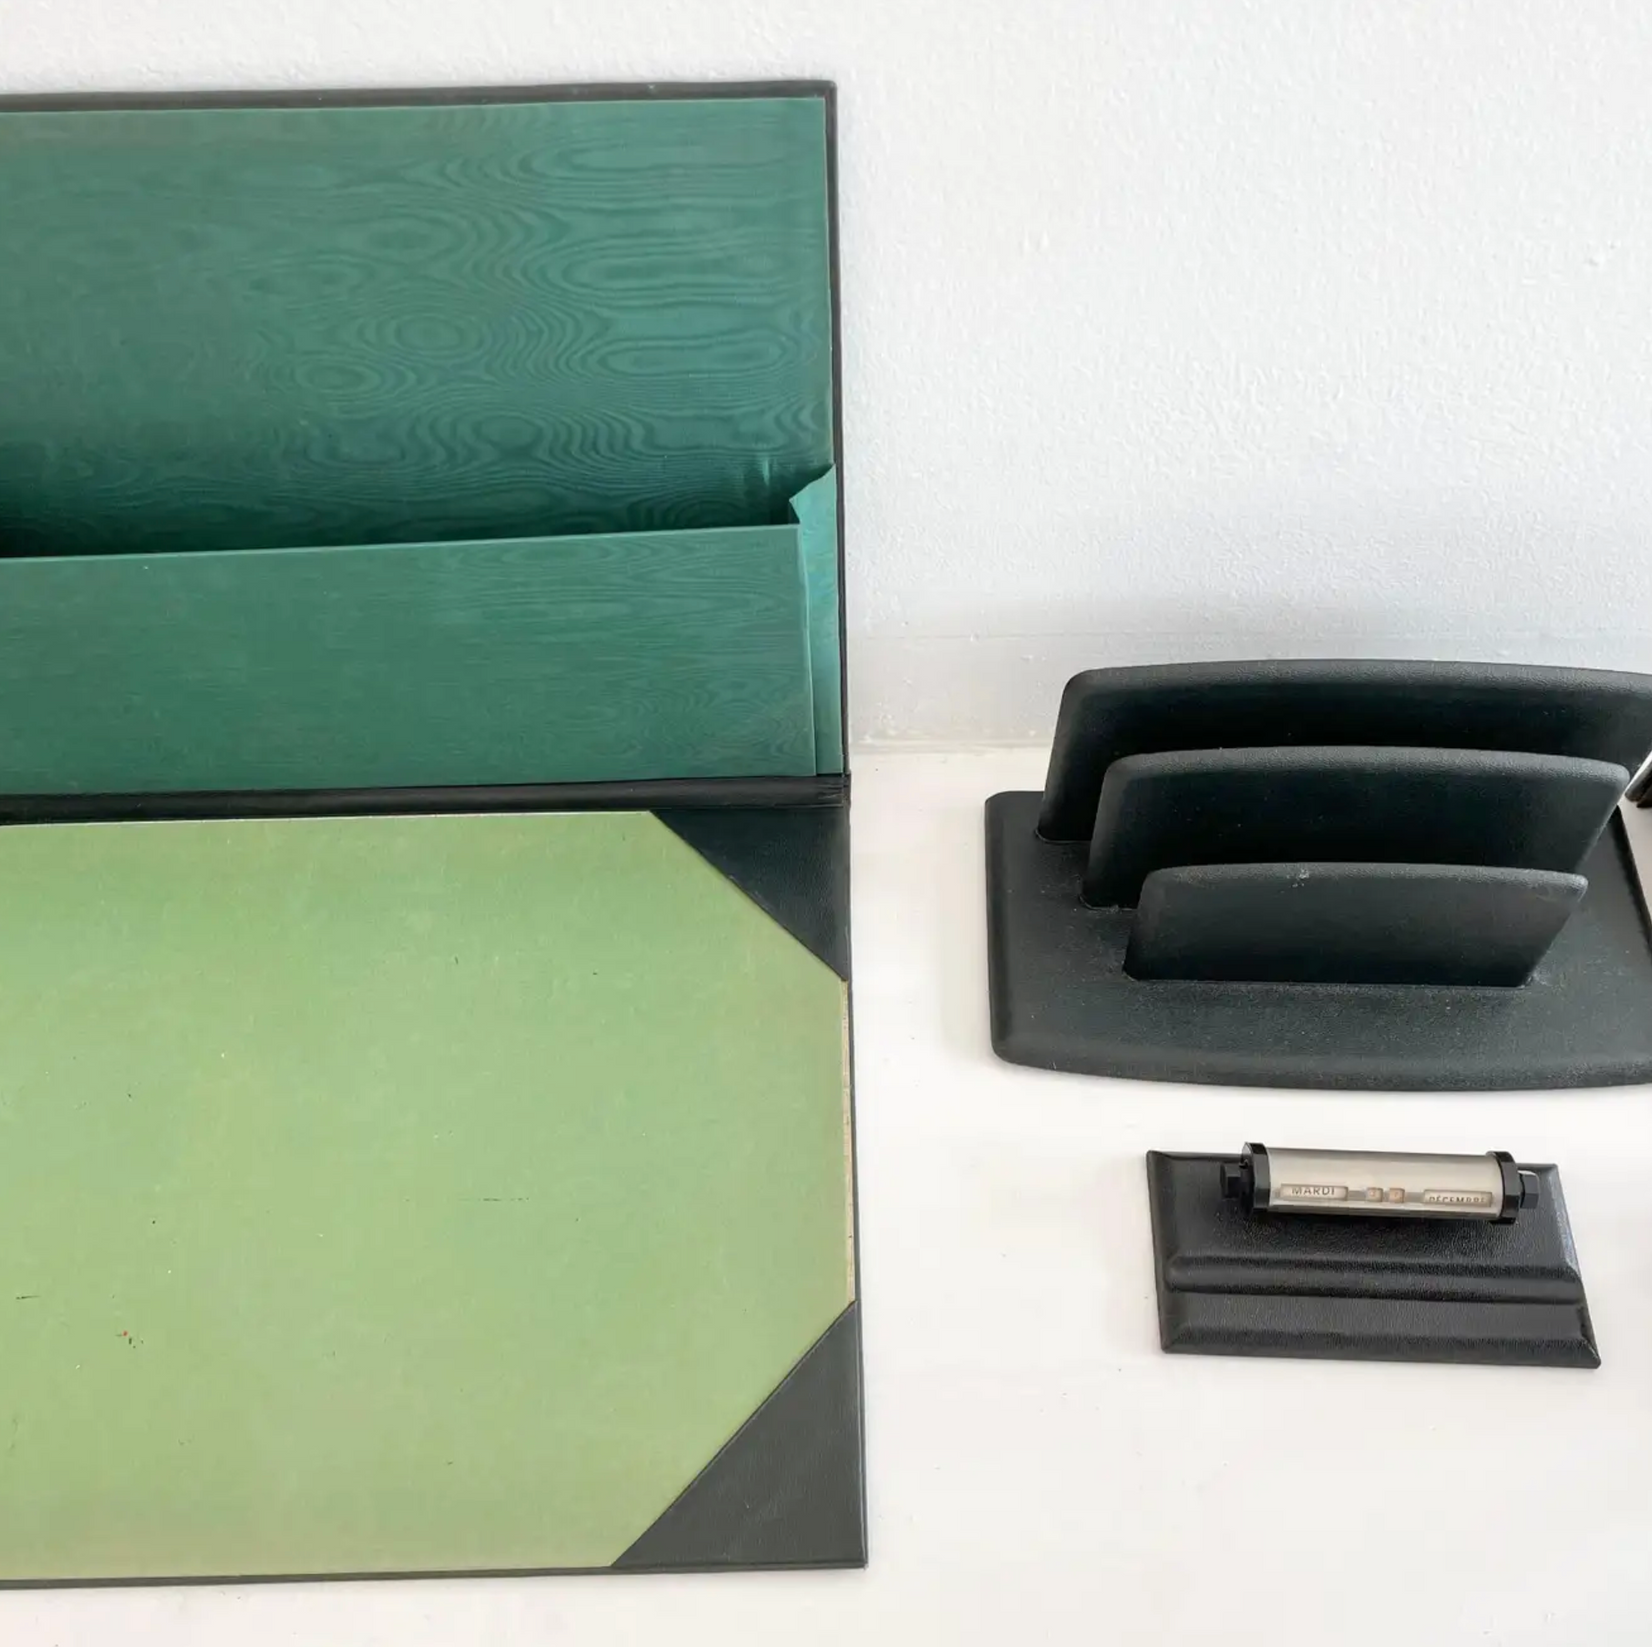 French Leather Desk Set by Le Tanneur, 1960s France